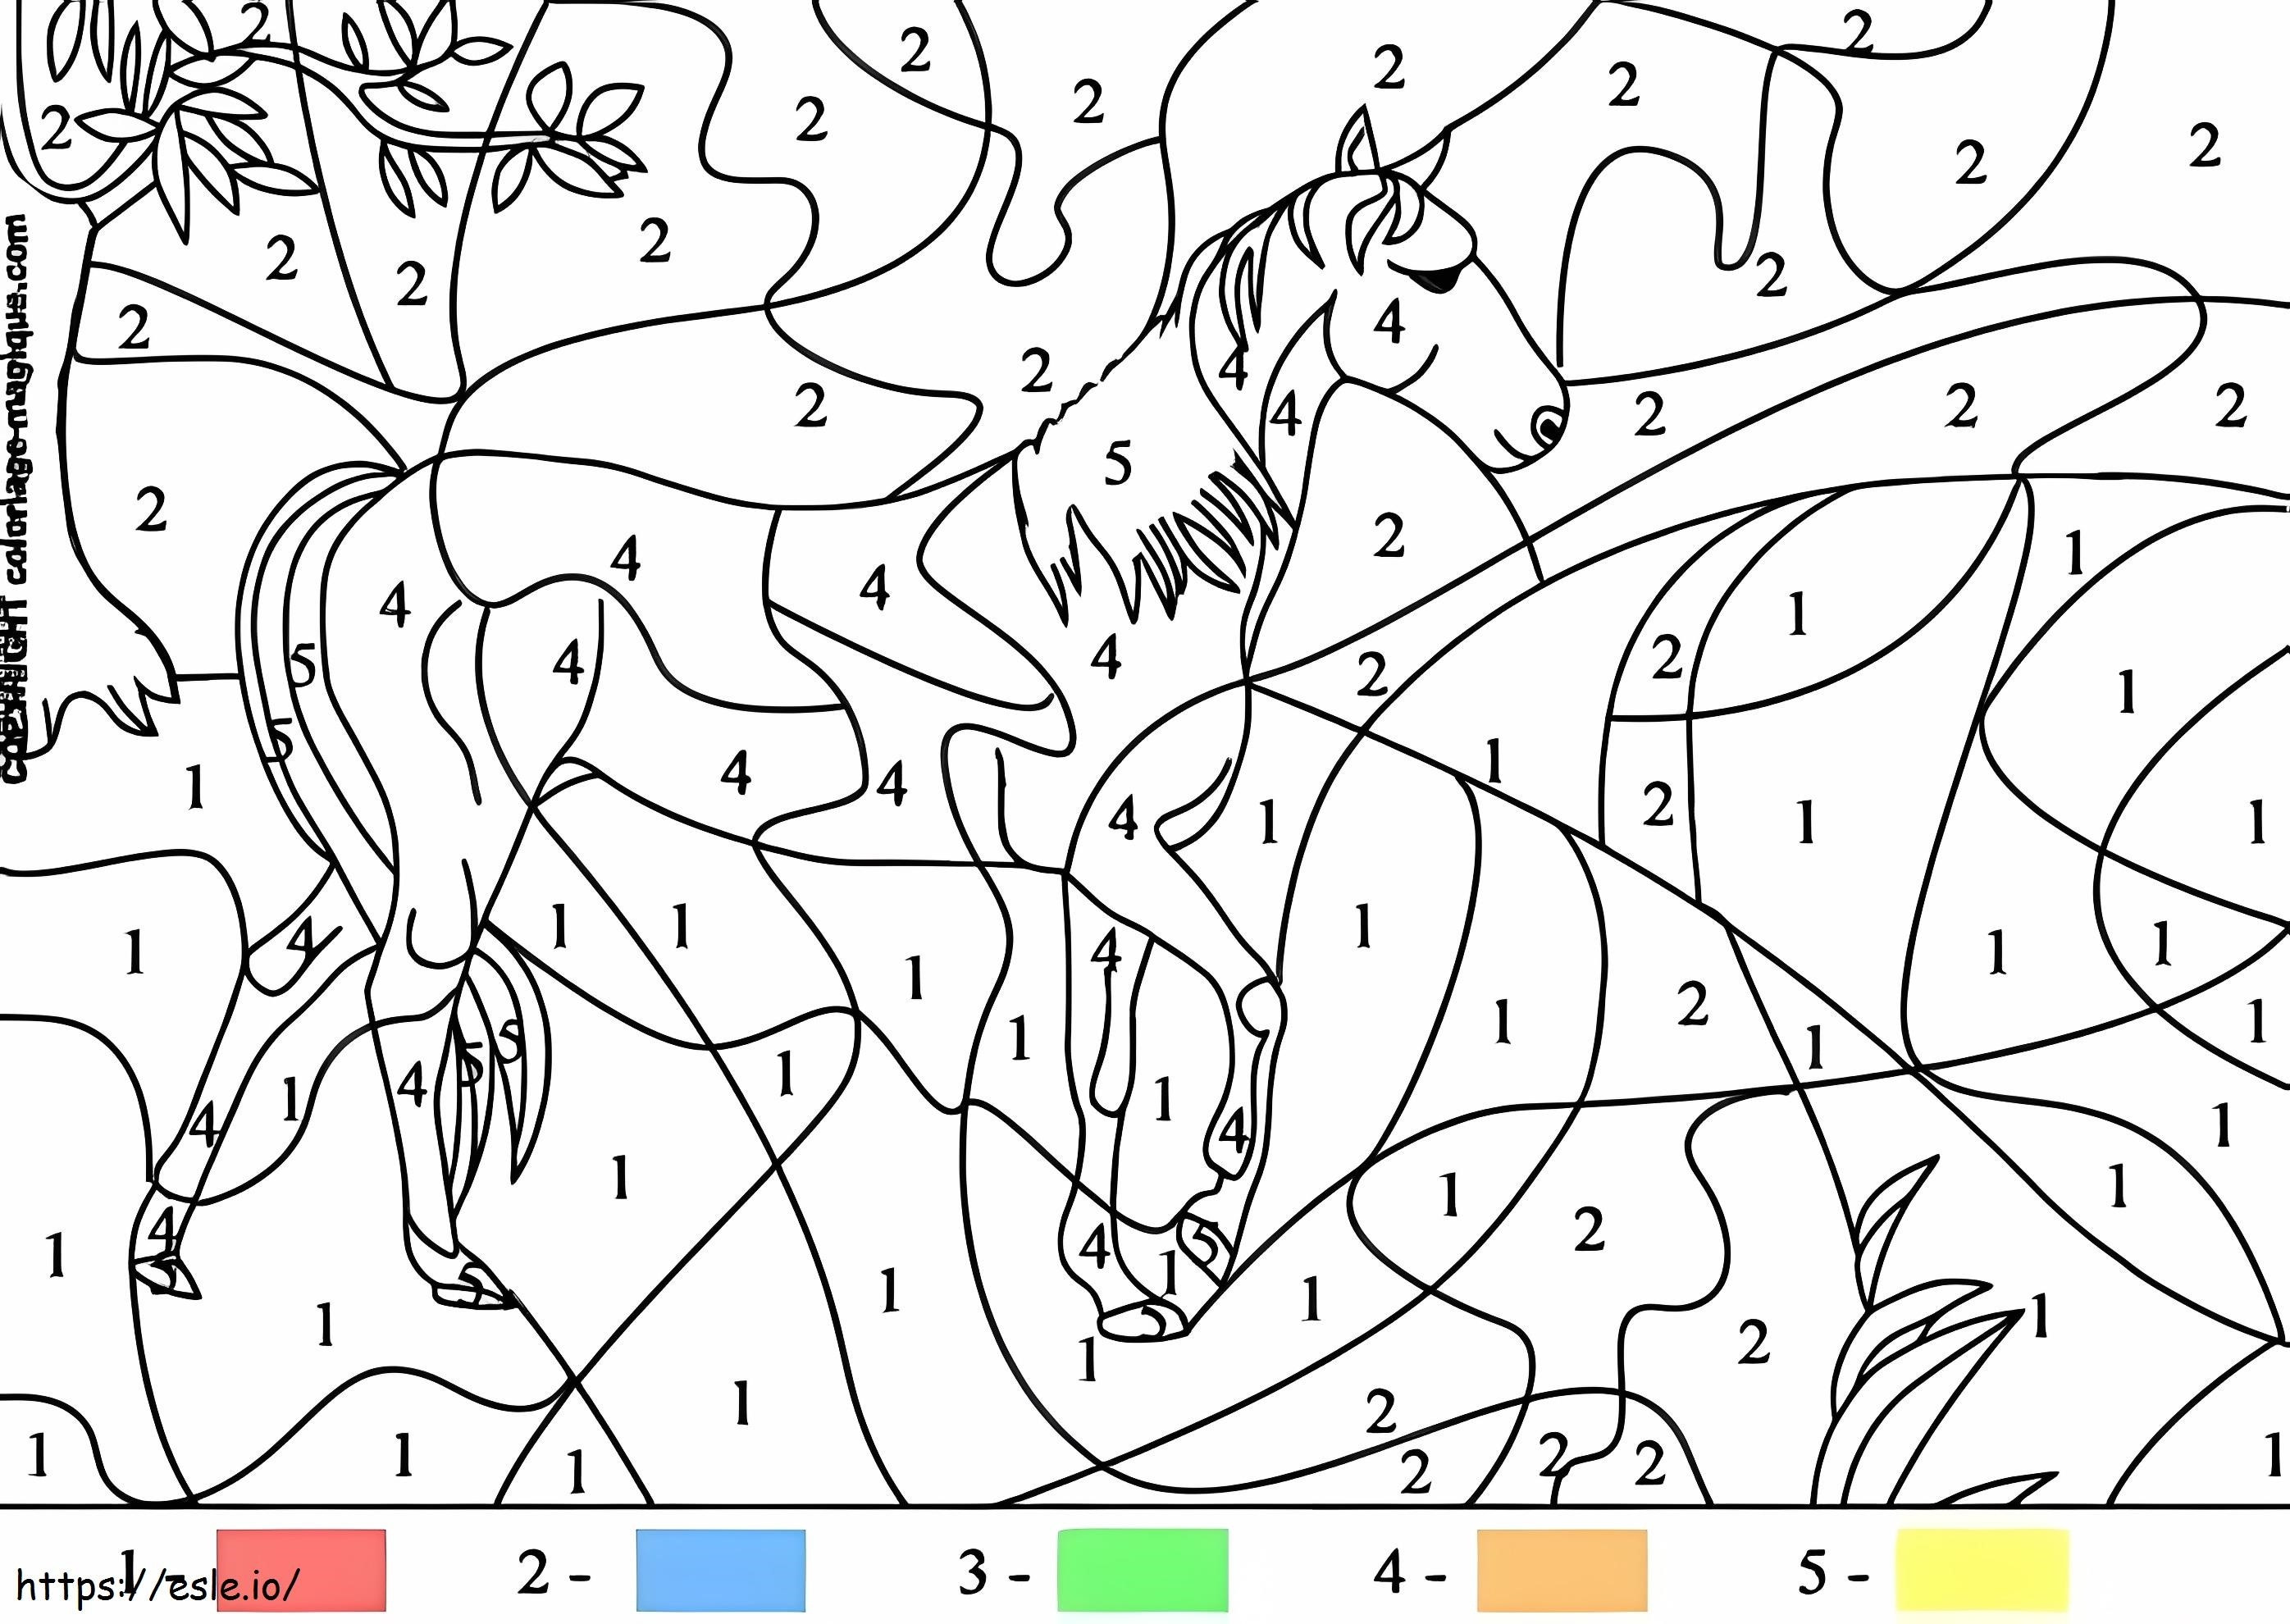 Magical Unicorn 2 coloring page